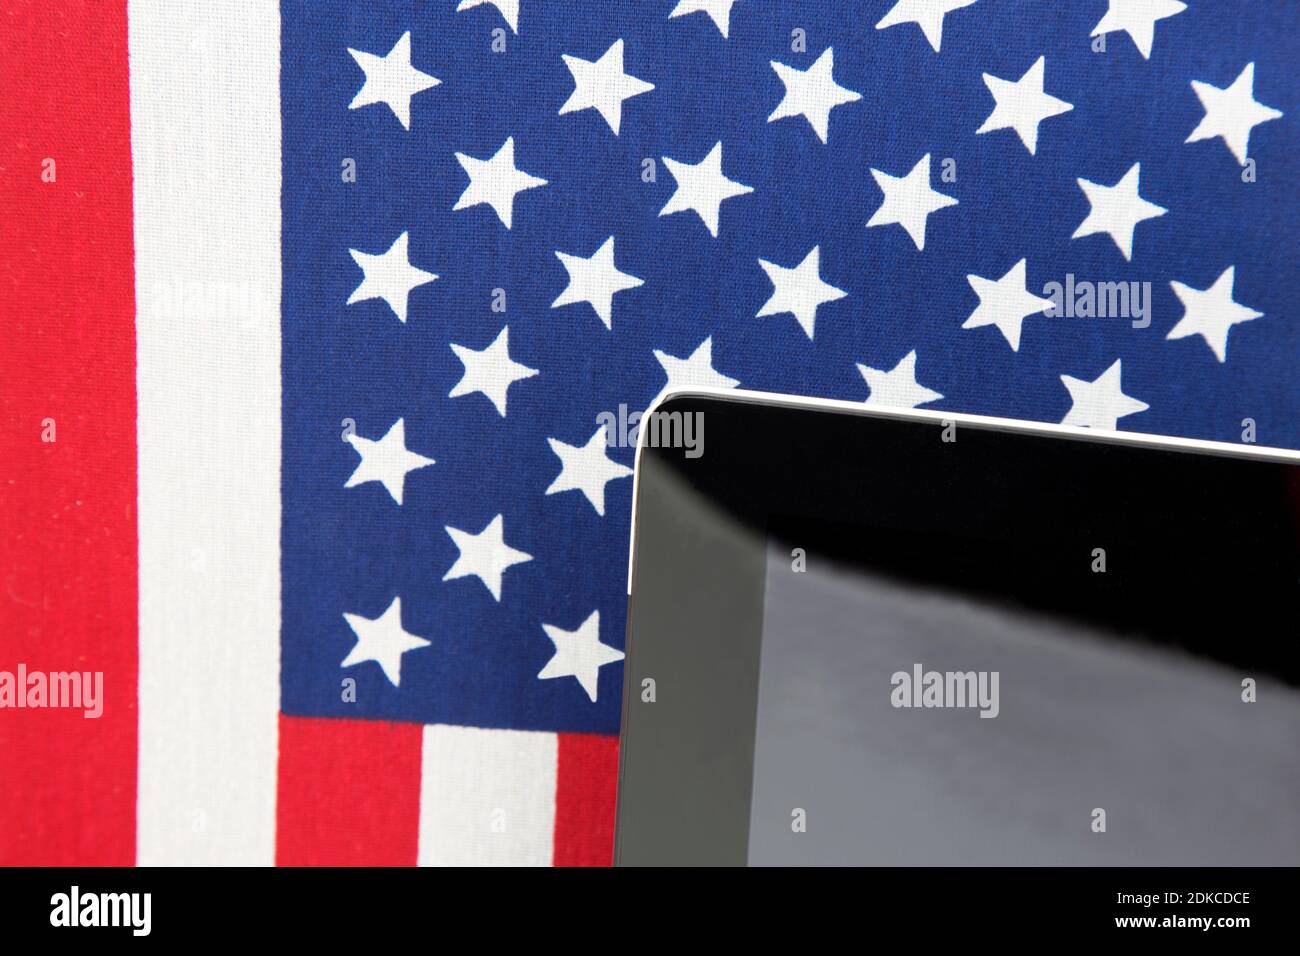 Remote learning and hybrid education are new alternatives in American schools shown with tablet and Stars and Stripes flag pattern Stock Photo